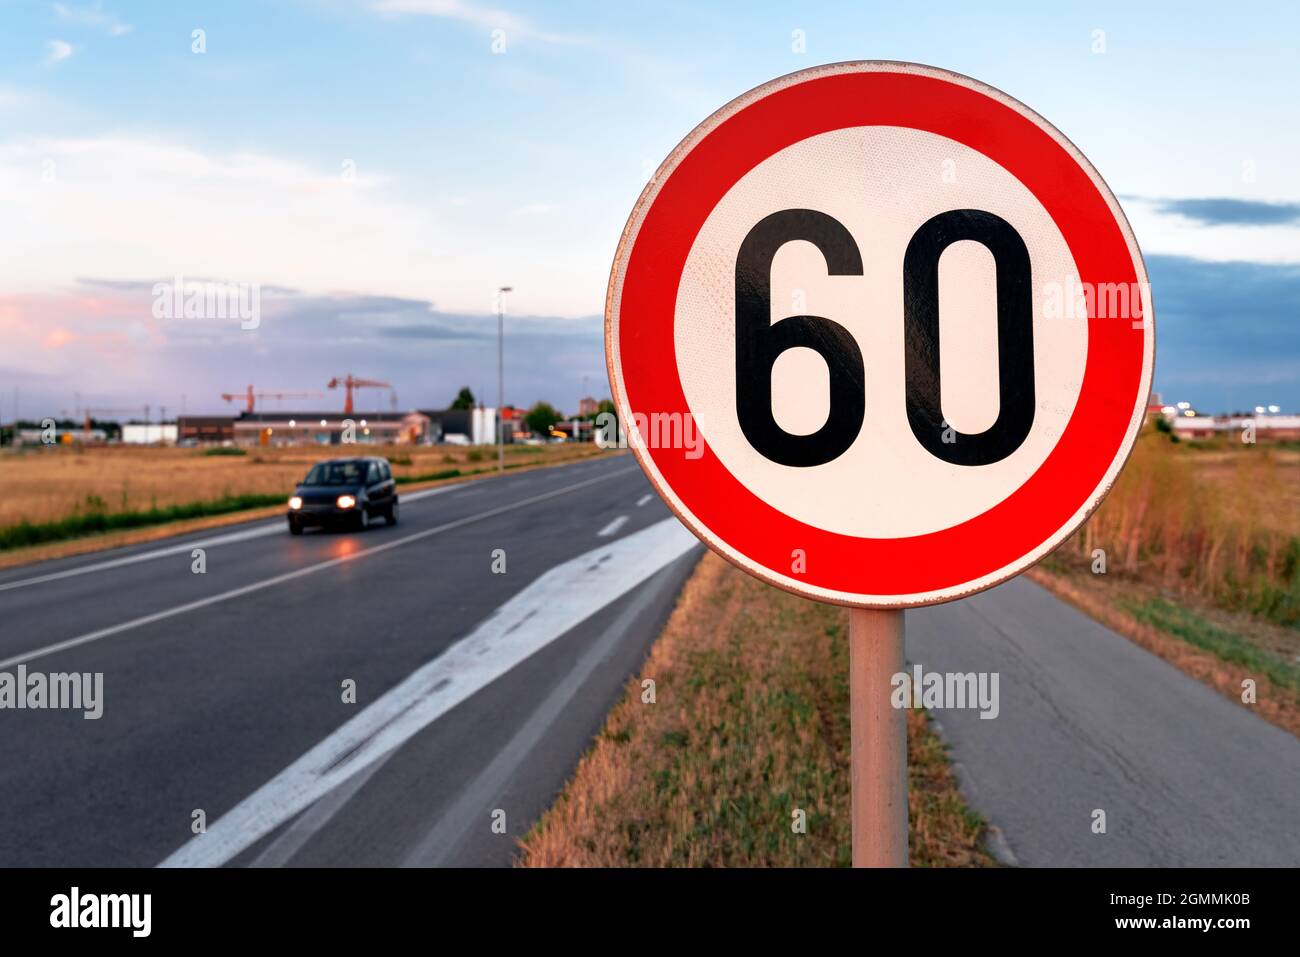 Speed limit at 60 kmph traffic sign by the road, blurred car in motion in background Stock Photo